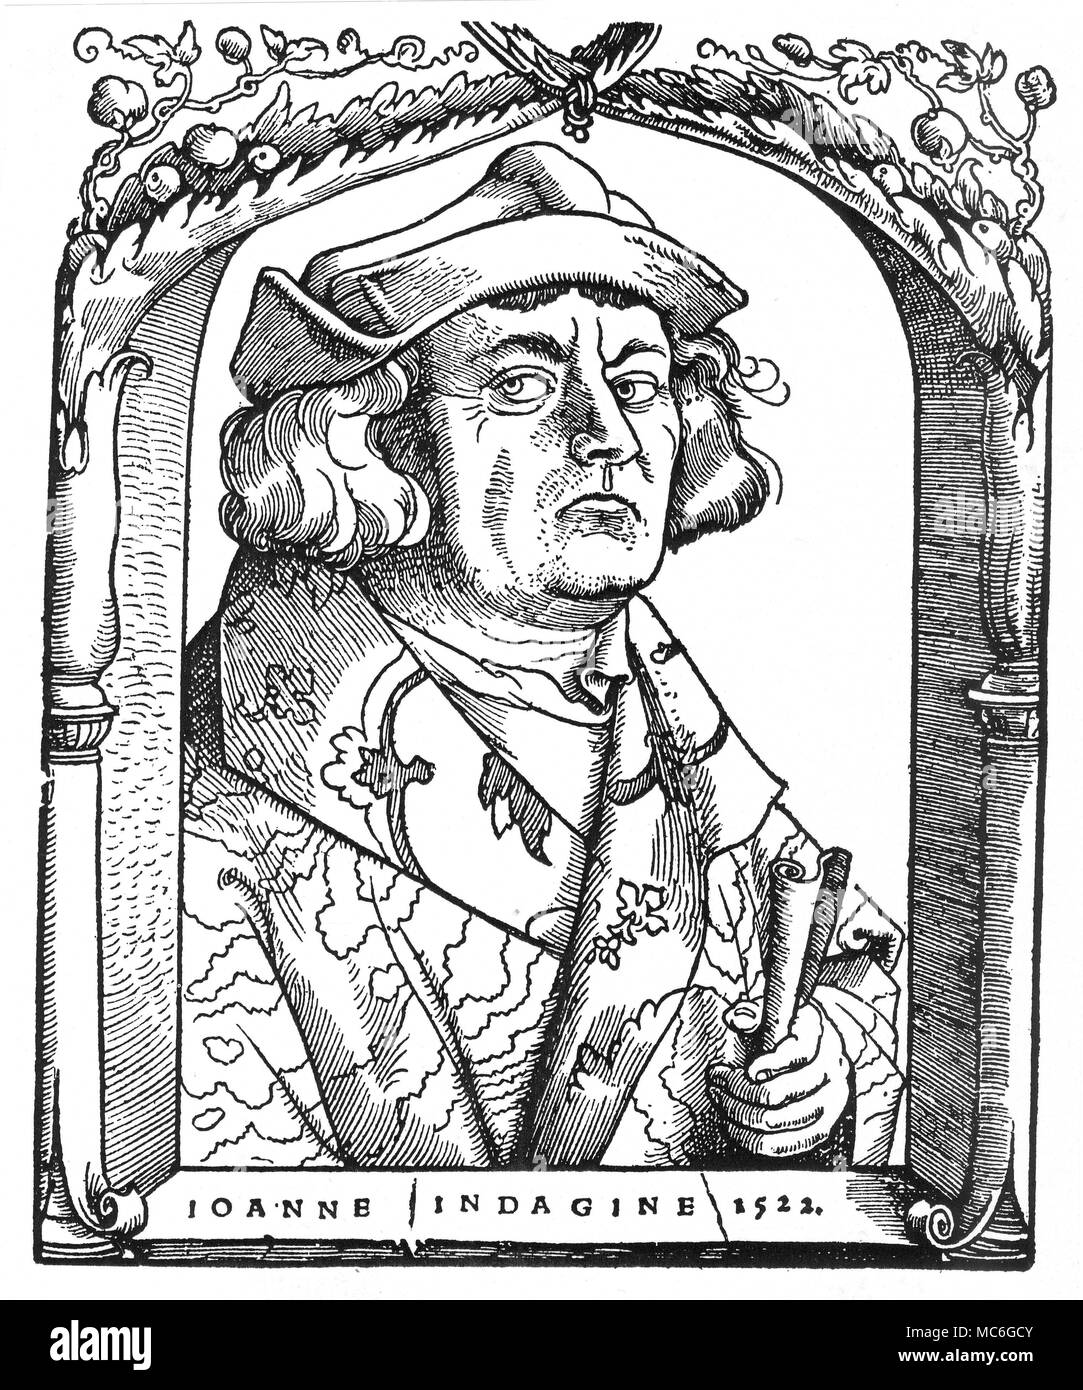 OCCULTISTS - JOANNE INDAGINE Woodcut portrait of the palmist, astrologer and physiognomist, Johanne Indagine, or Von Hagen, made for the latter's popular work, Introductiones Apotelesmaticae elegantes, 1522. Indagine was a learned priest of Steinheim, near Frankfurt: his book (more properly 'books', as the three disciplines were presented in three sections, even down to having different sequences of pagination), was among the most popular of its kind during the early 16th century, and was published in English, French and Germany in many editions. Stock Photo